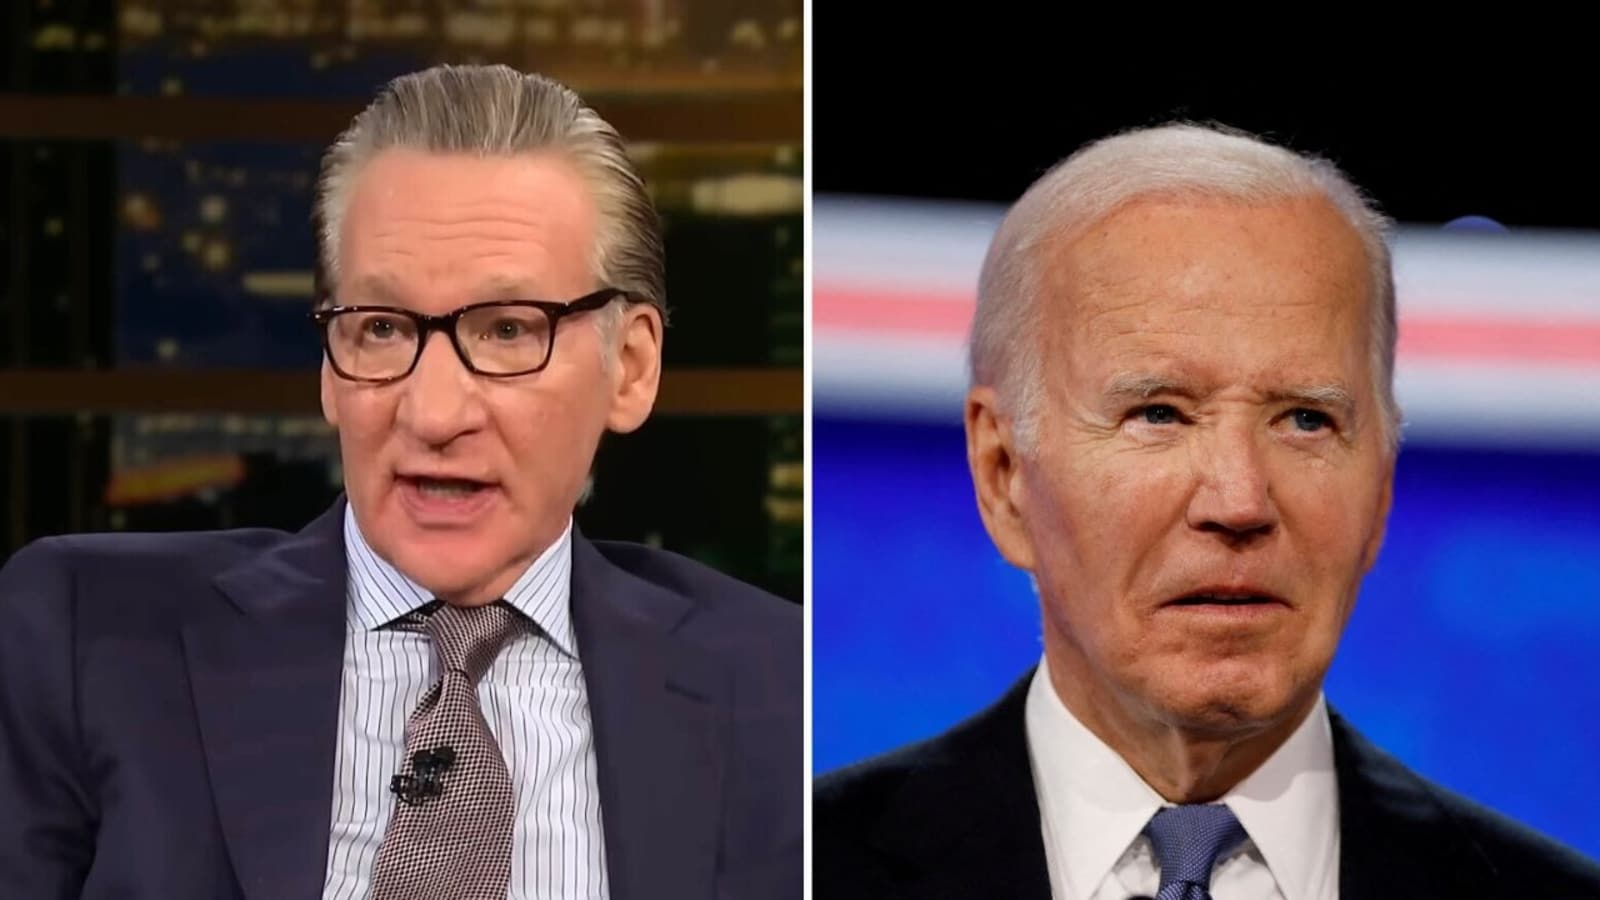 Bill Maher urges Joe Biden to drop out, reveals his pick to replace president: ‘Desperate need of new characters’